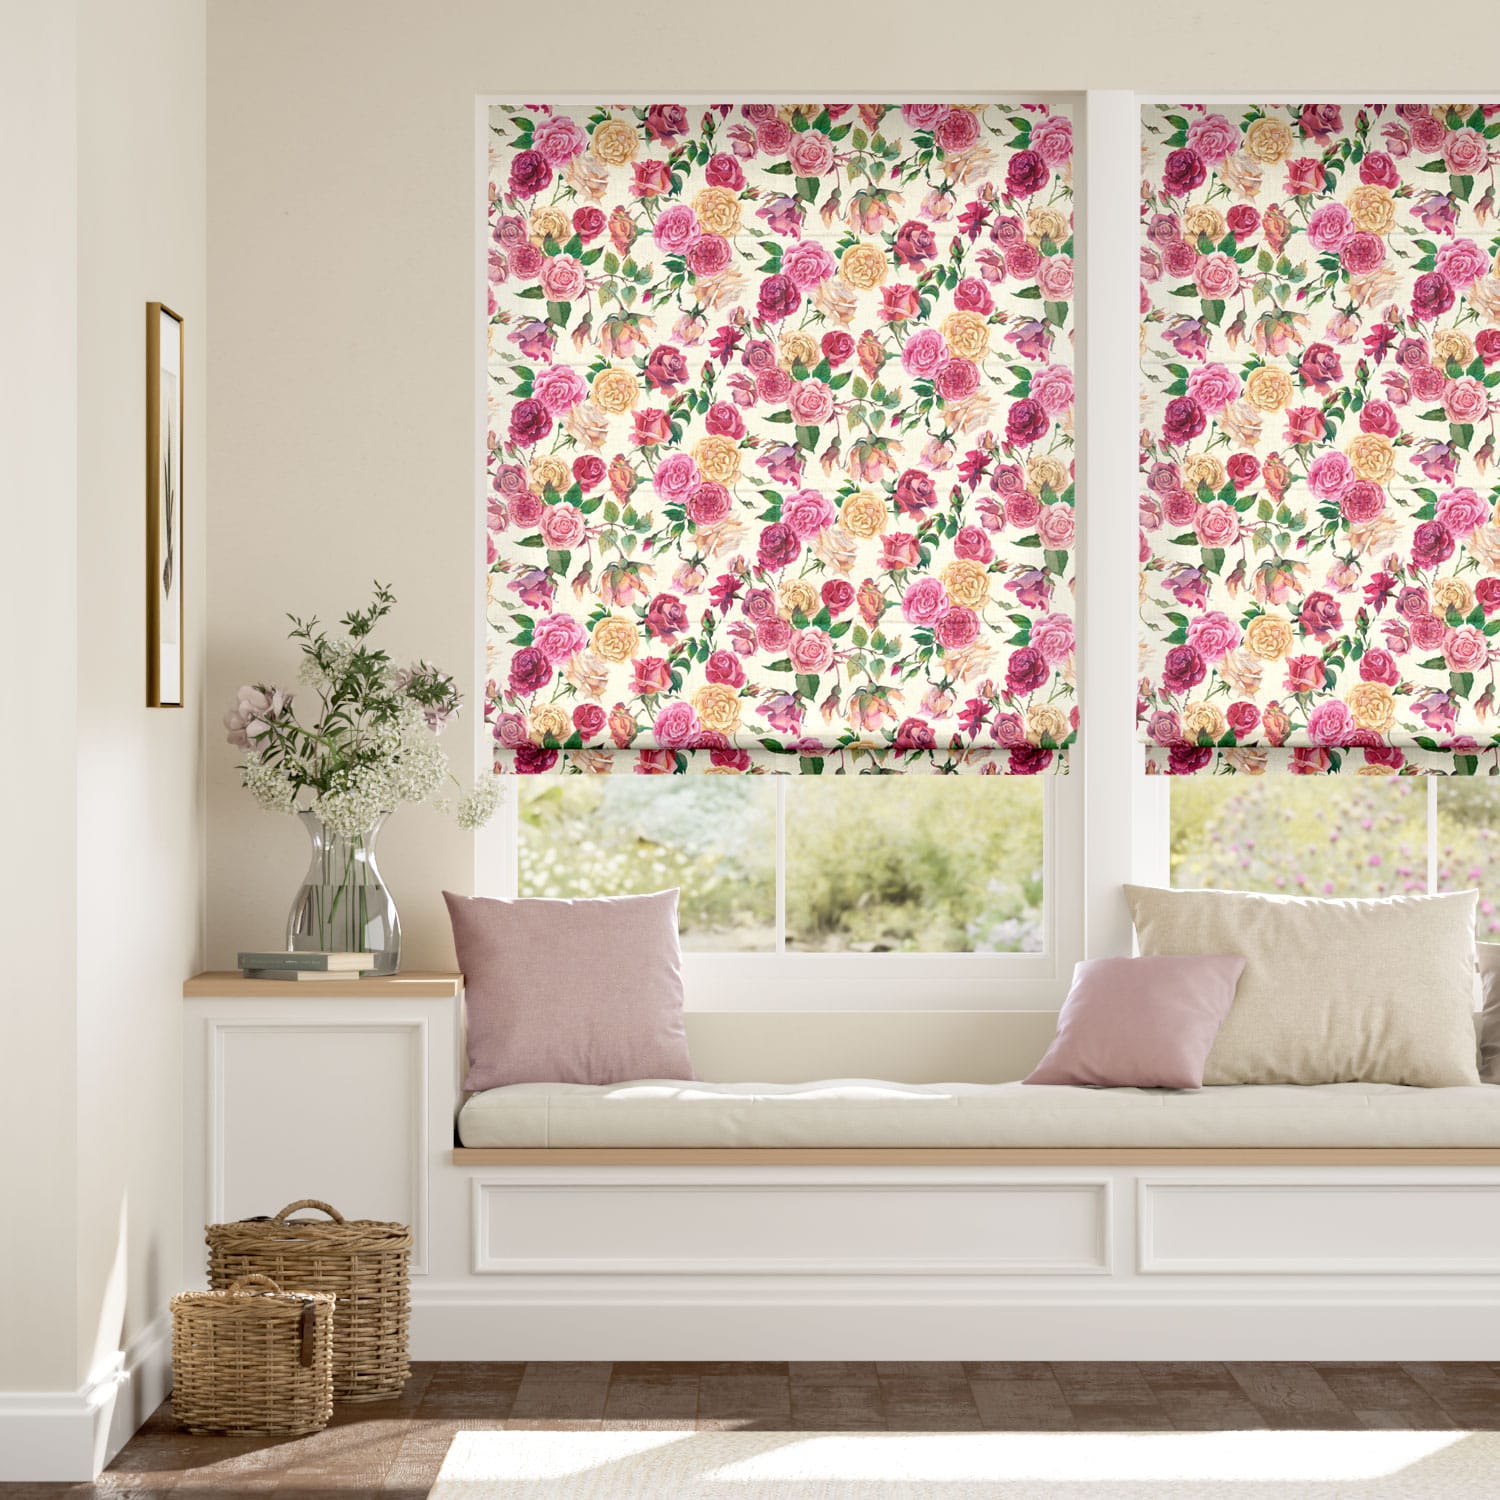 Roses All My Life Pink Roman Blind